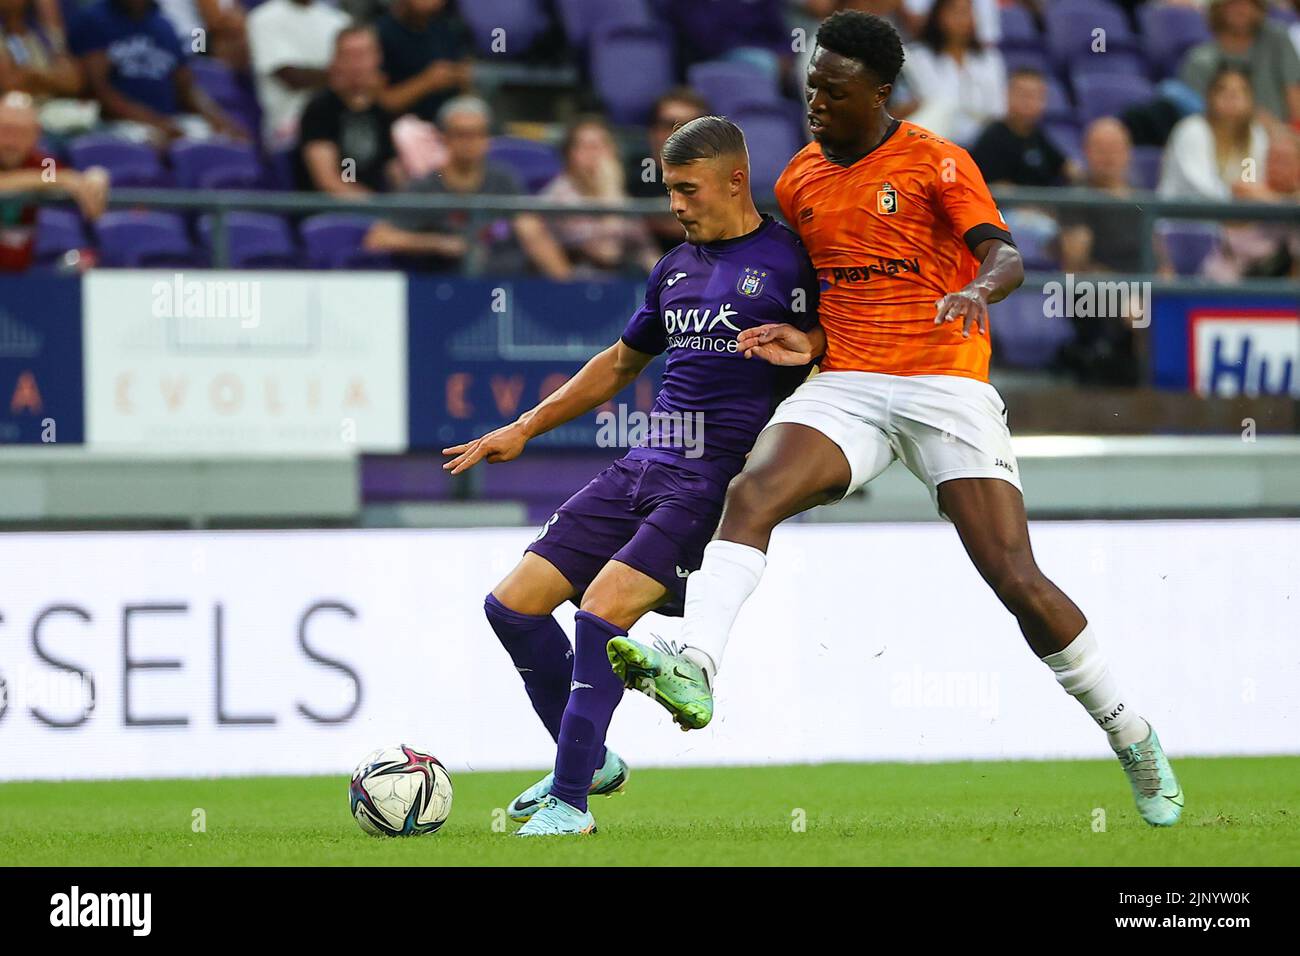 RSCA Futures' Mohamed Bouchouari and Deinze's Bafode Dansoko fight for the  ball during a soccer match between RSC Anderlecht Futures and KMSK Deinze,  Sunday 14 August 2022 in Anderlecht, on day 1